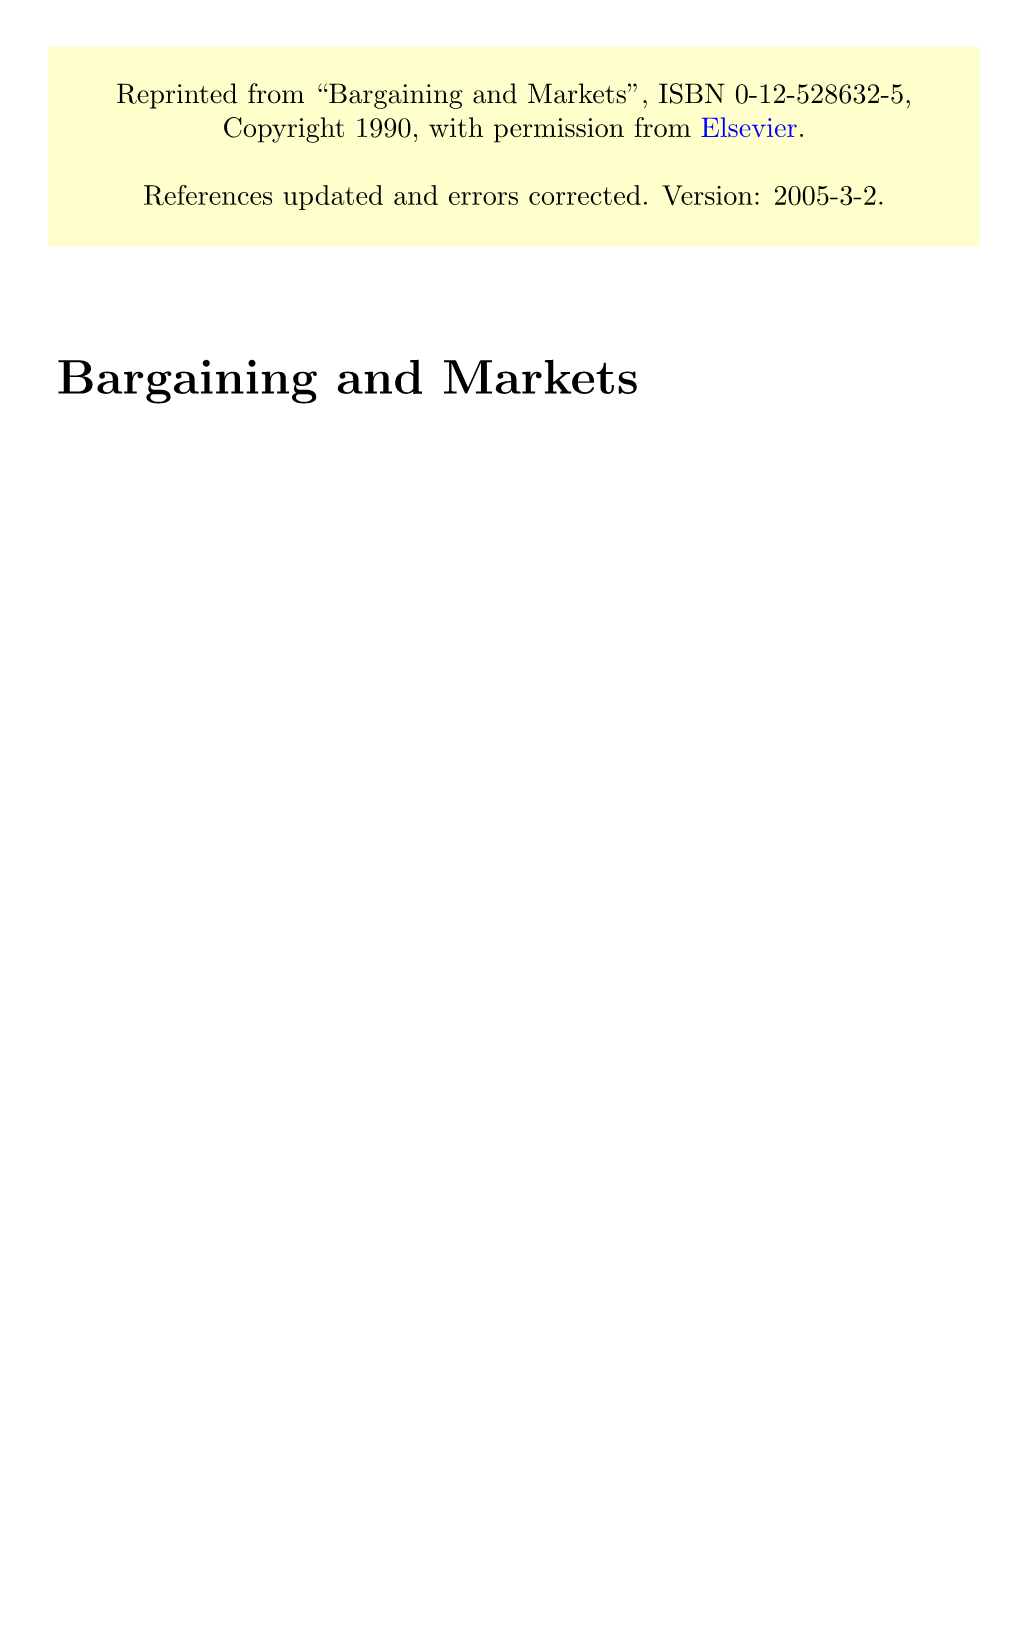 Bargaining and Markets”, ISBN 0-12-528632-5, Copyright 1990, with Permission from Elsevier